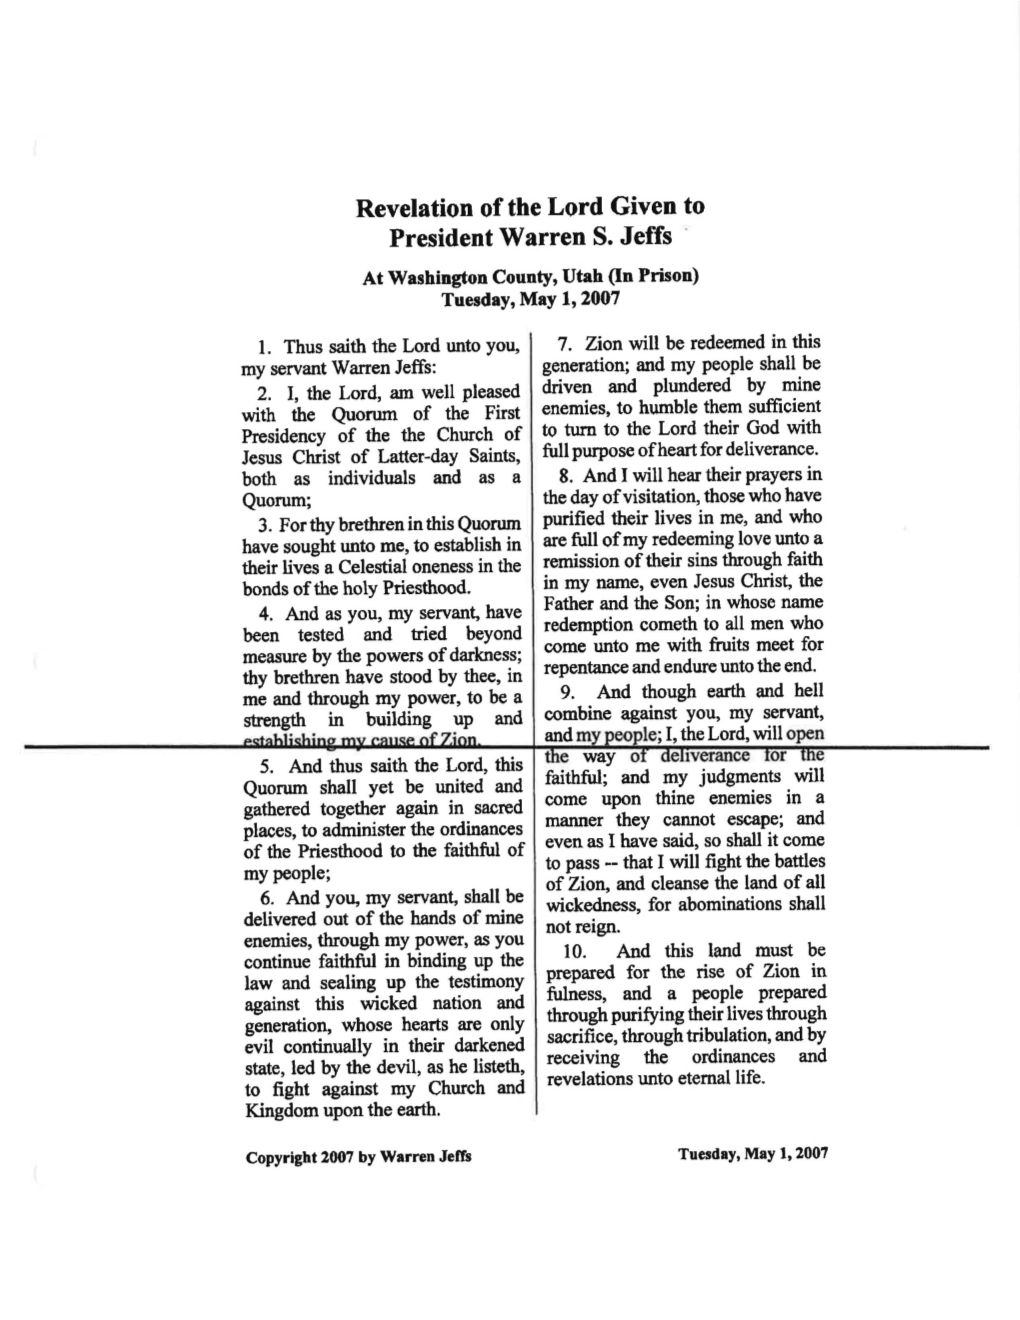 Revelation of the Lord Given to President Warren S. Jeffs · at Washington County, Utah (In Prison) Tuesday, May 1,2007